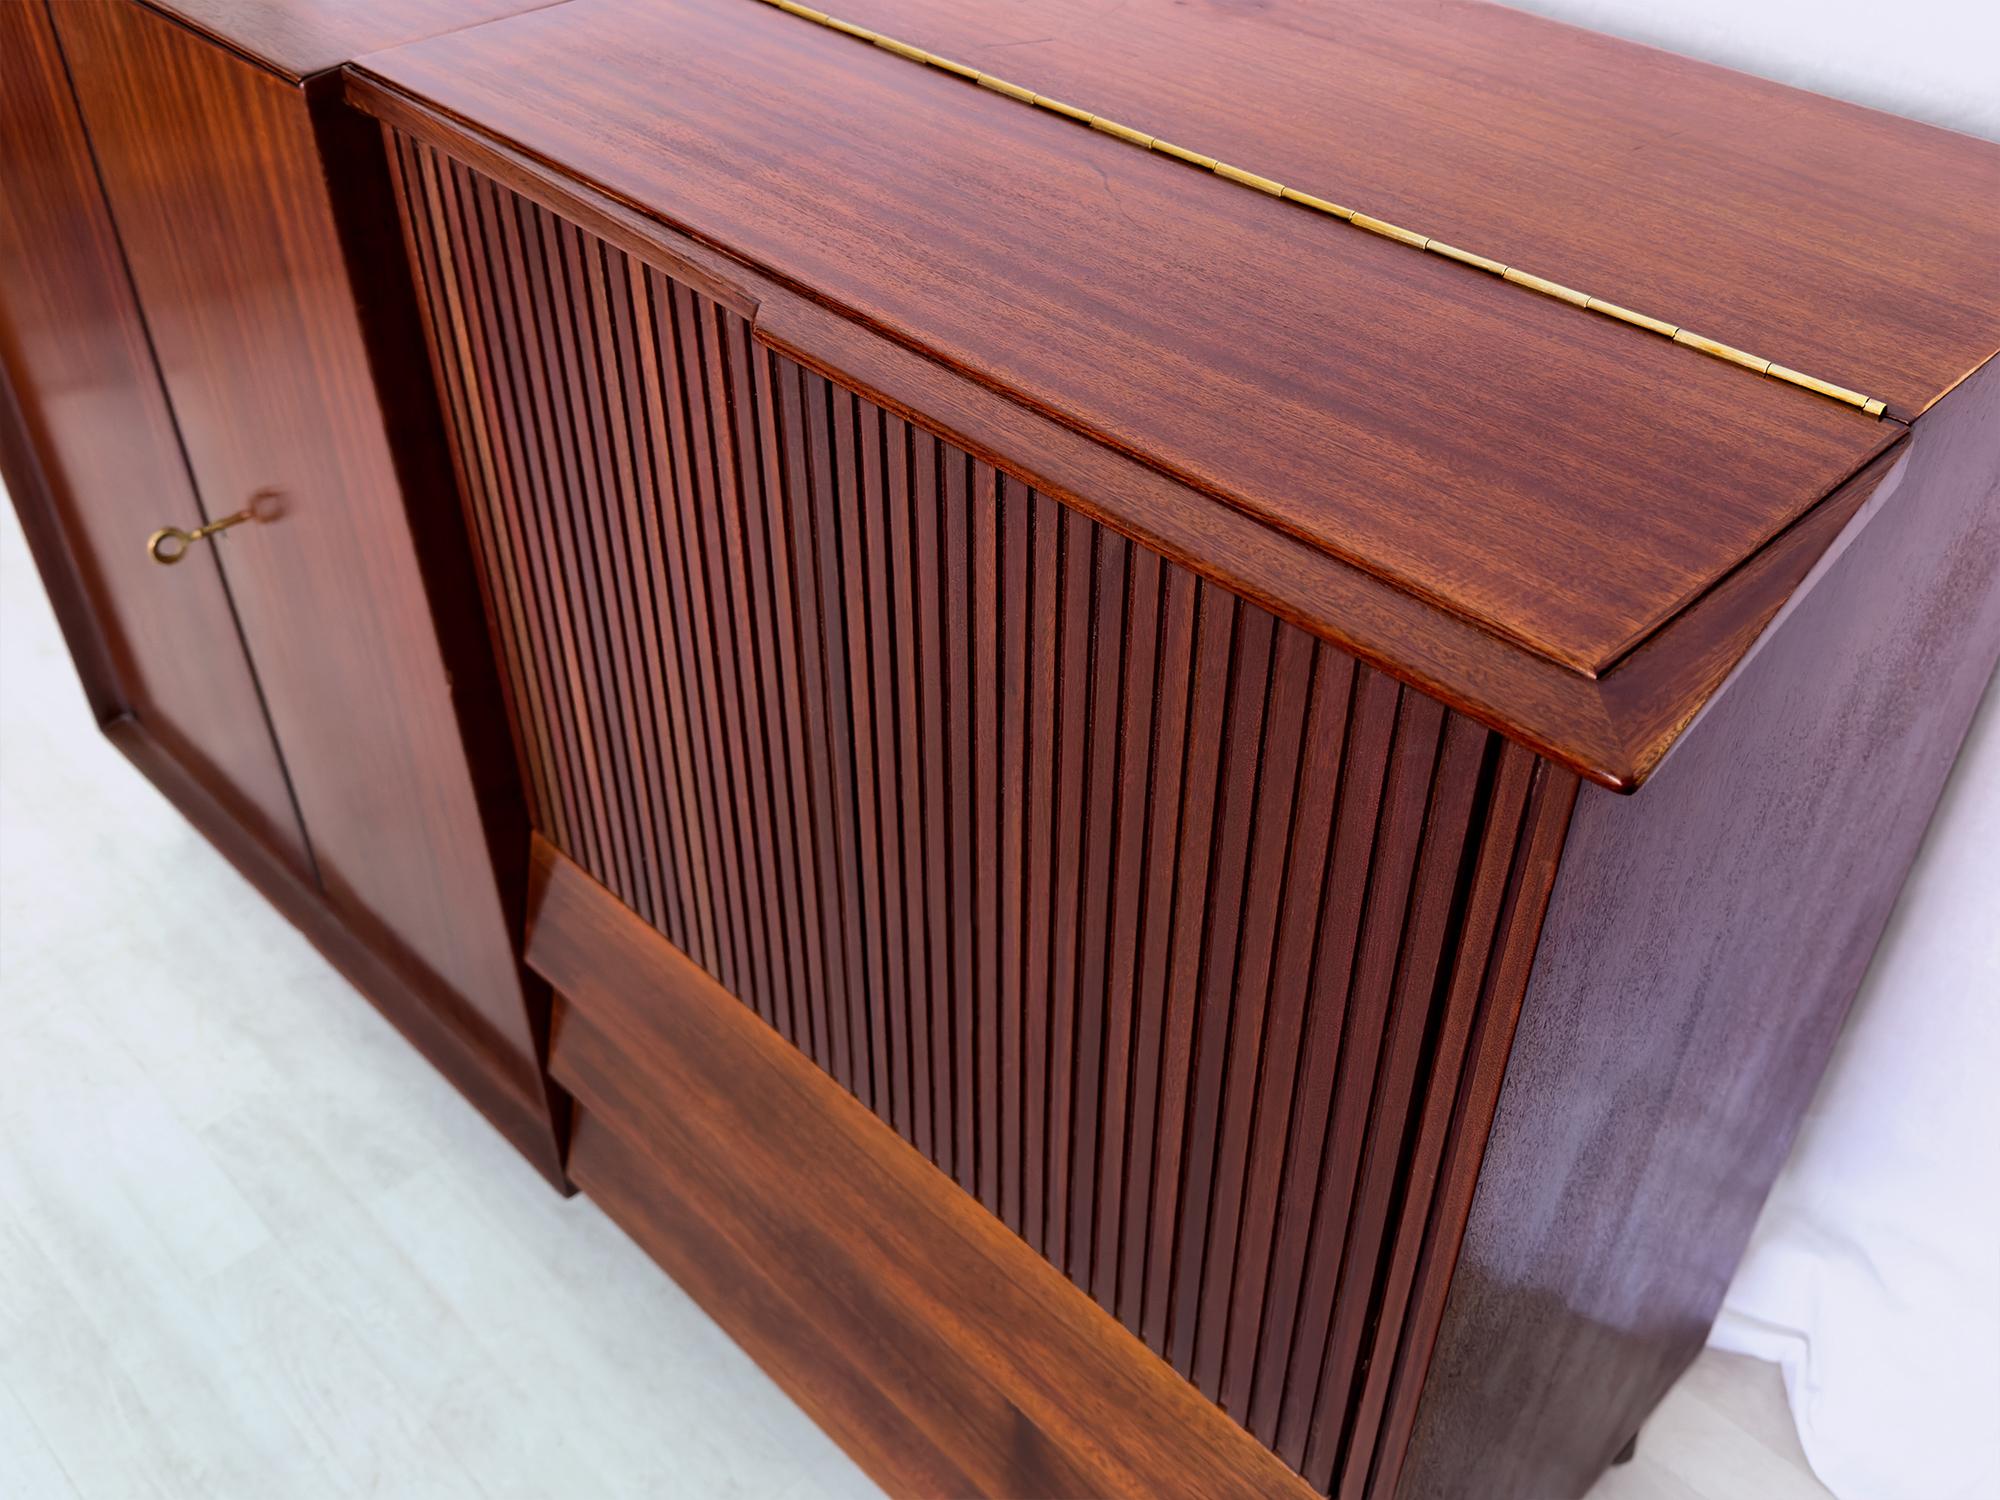 Italian Mid-Century Teak Wood Sideboard with Bar Cabinet by Vittorio Dassi, 1950s For Sale 6